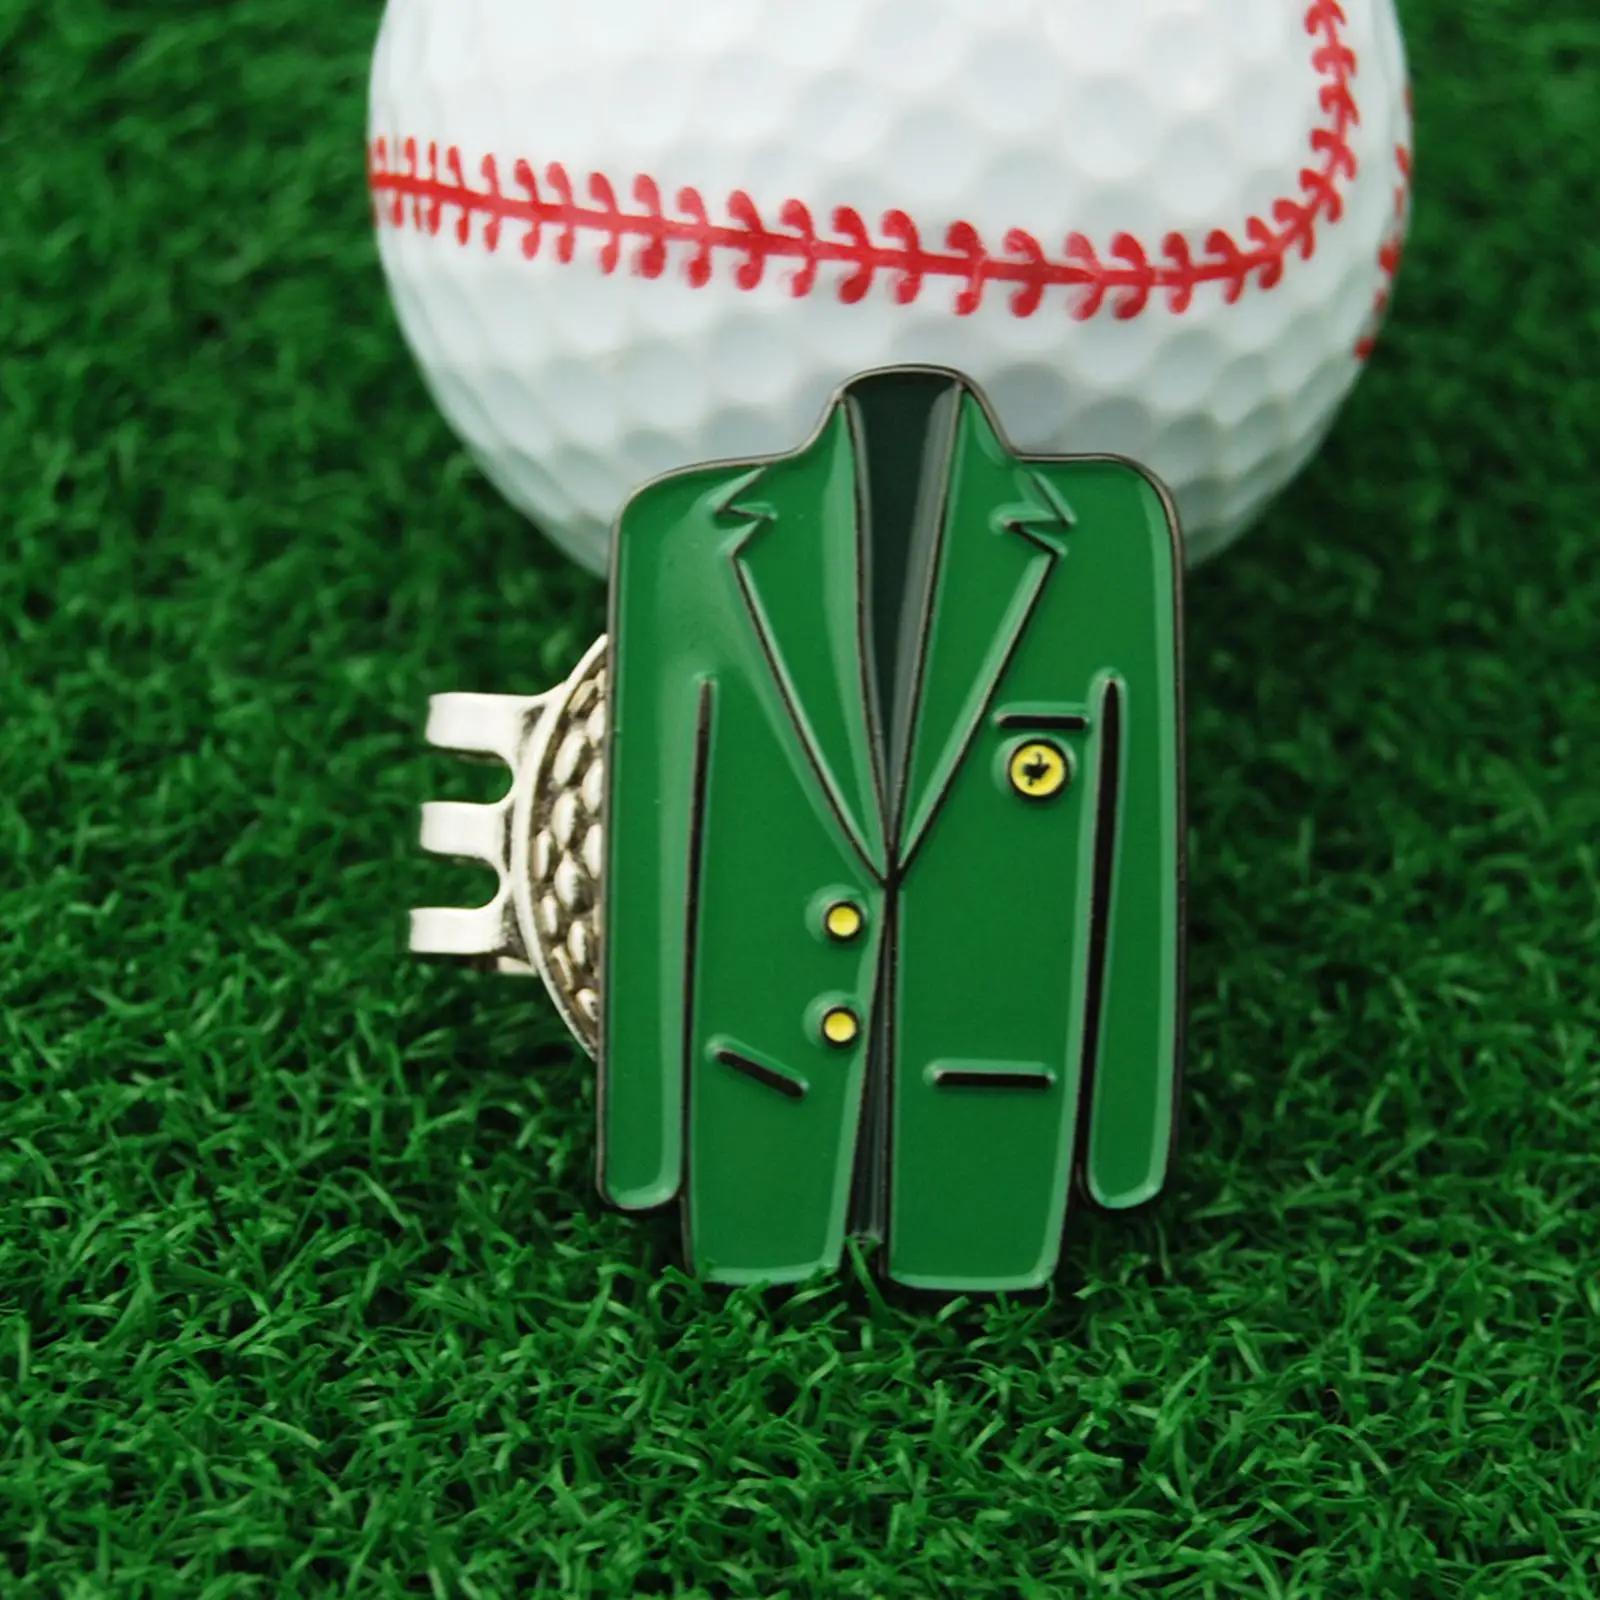 Golf Ball Marker Premium Gifts for Golf Lover Holidays Christmas Eye Catching Game Creative Green Jacket Golf Training Aid